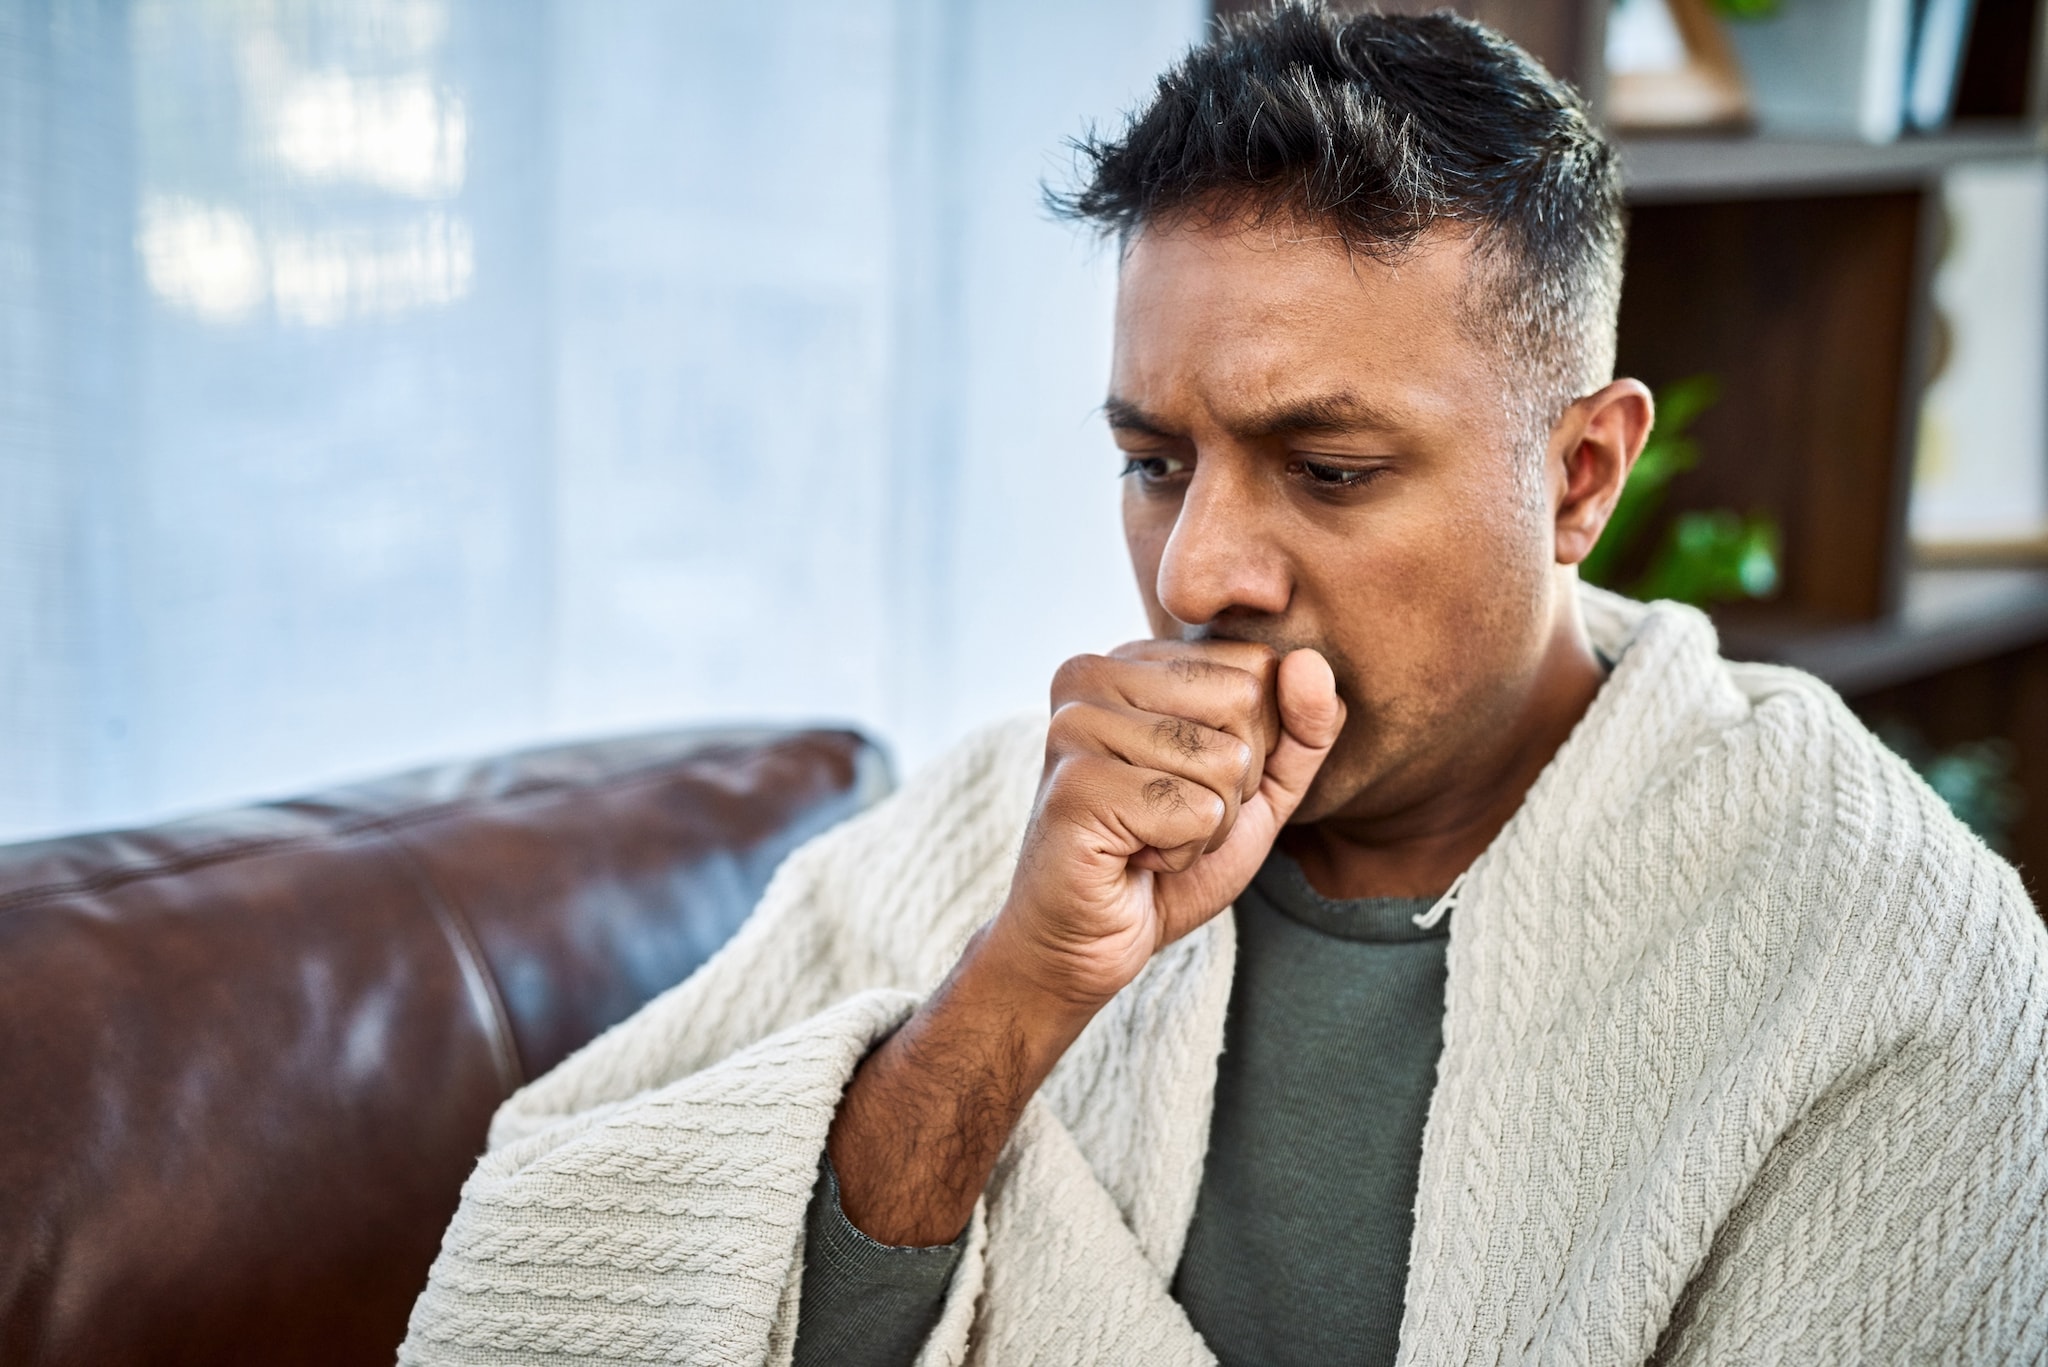 Stock image of a man coughing while covering his mouth with his fist.